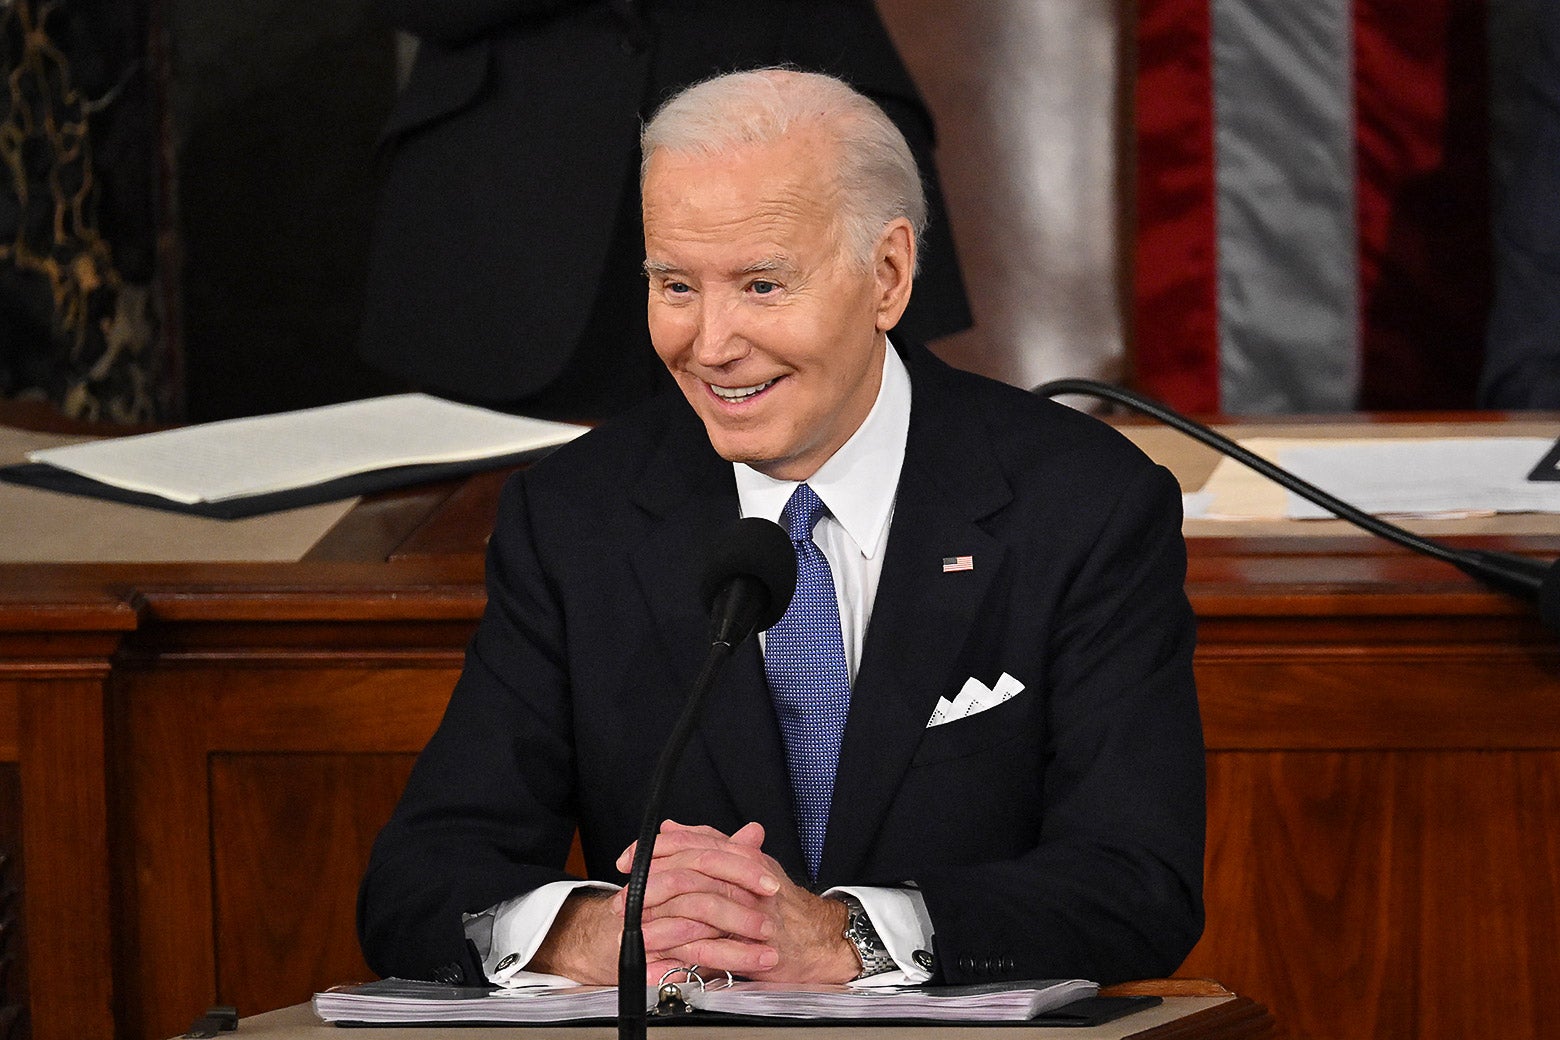 A Scientific Breakdown of Exactly How Old Joe Biden Seemed at the State of the Union Ben Mathis-Lilley